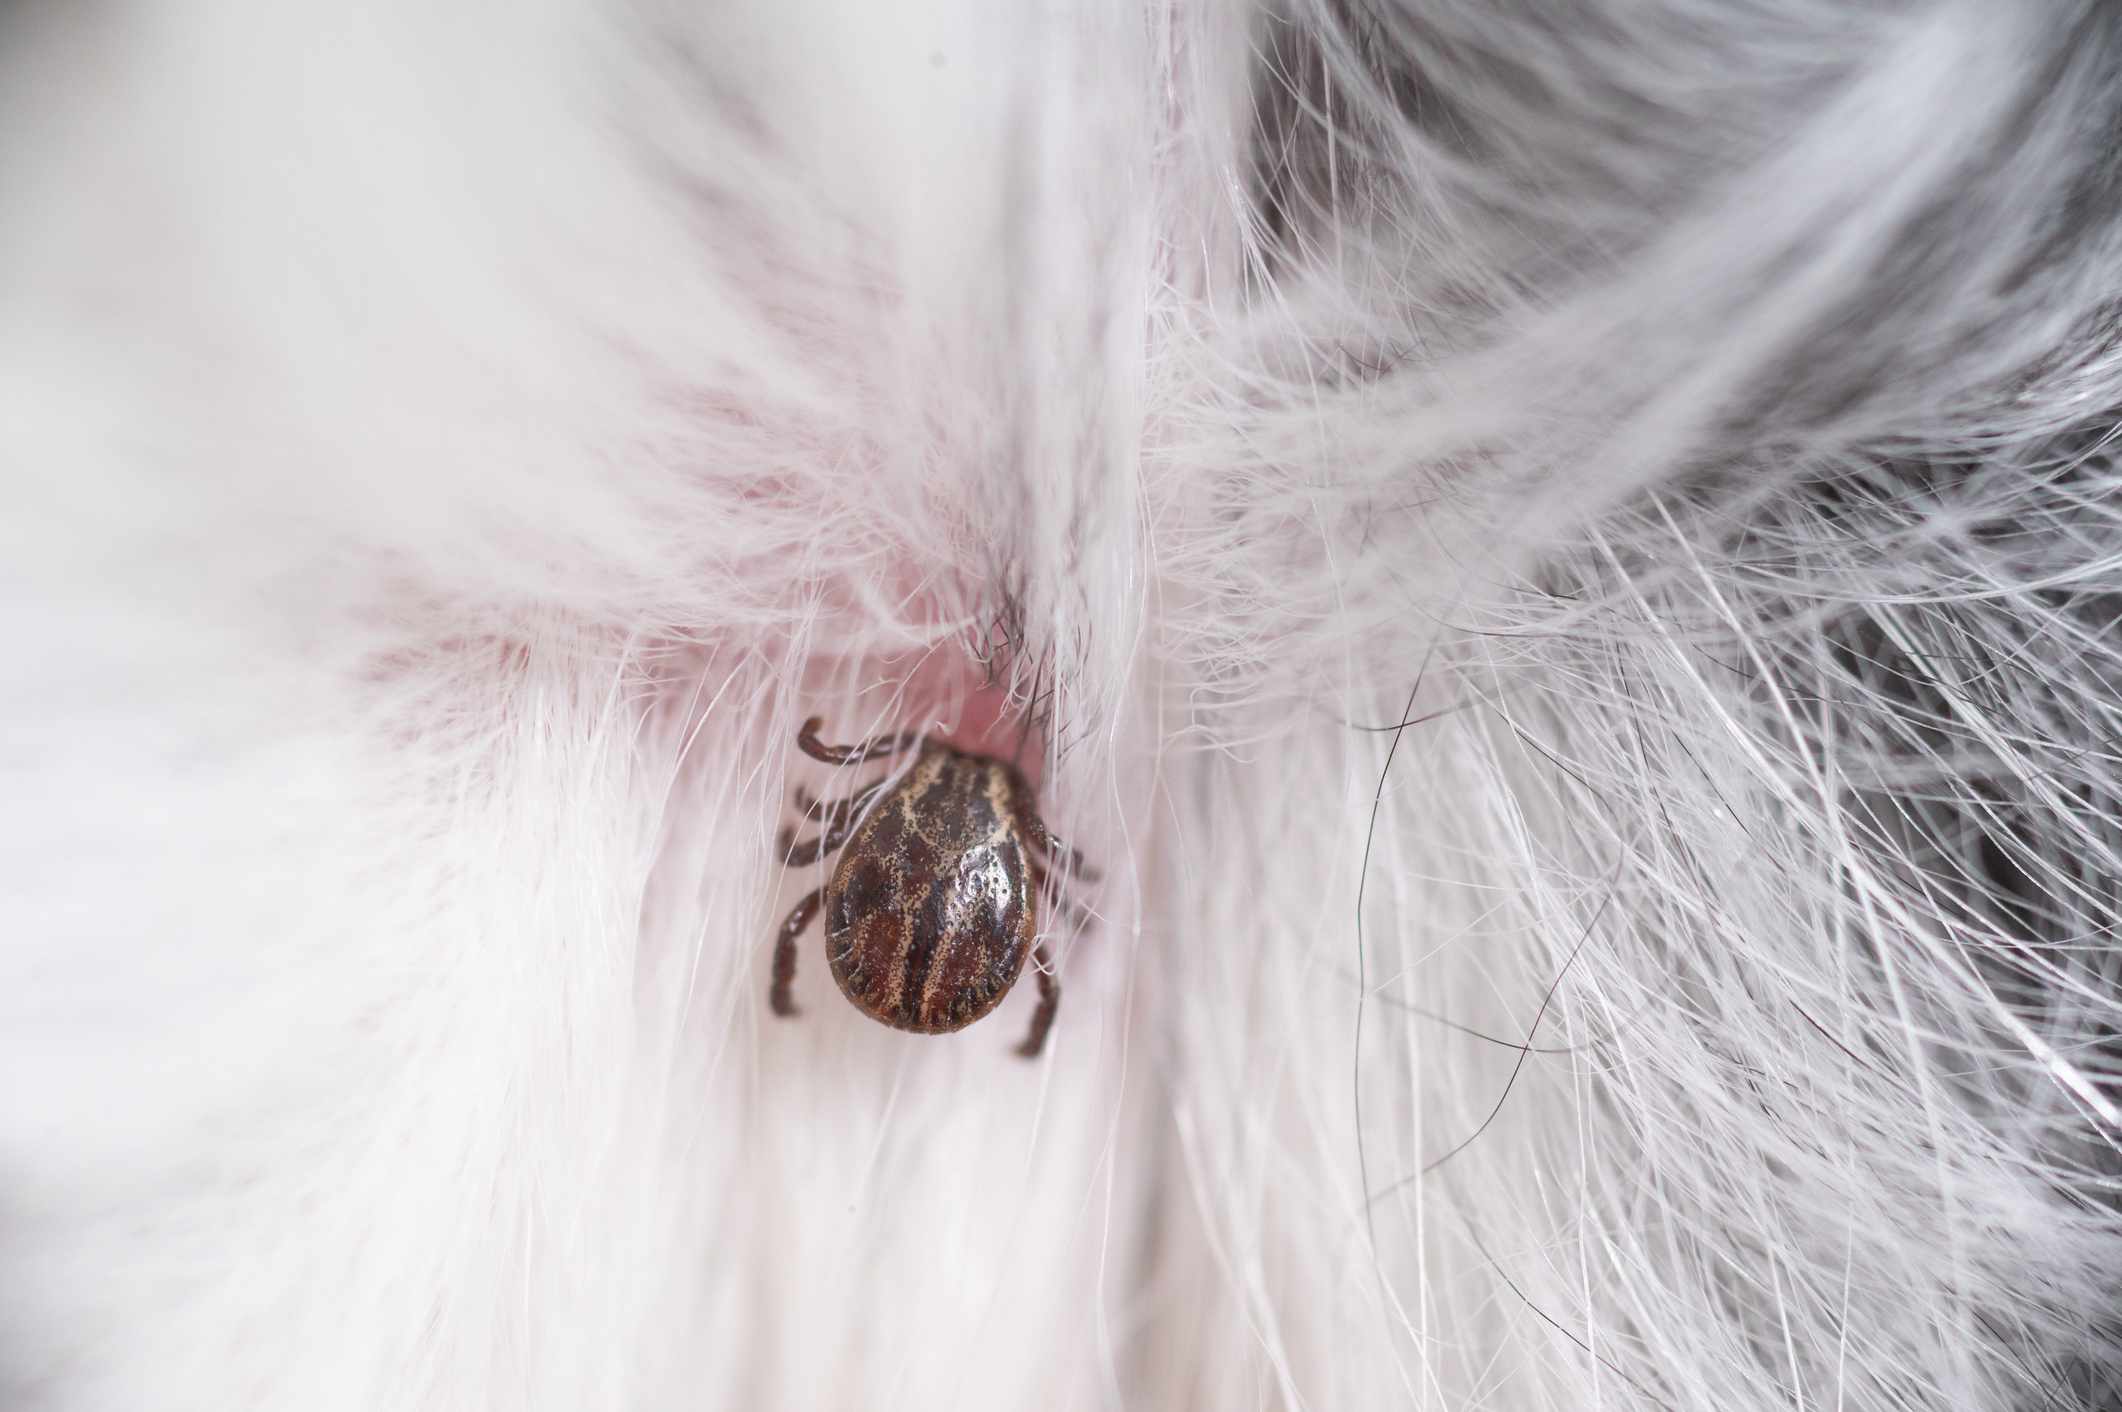 How Long Will A Tick Live On A Dog